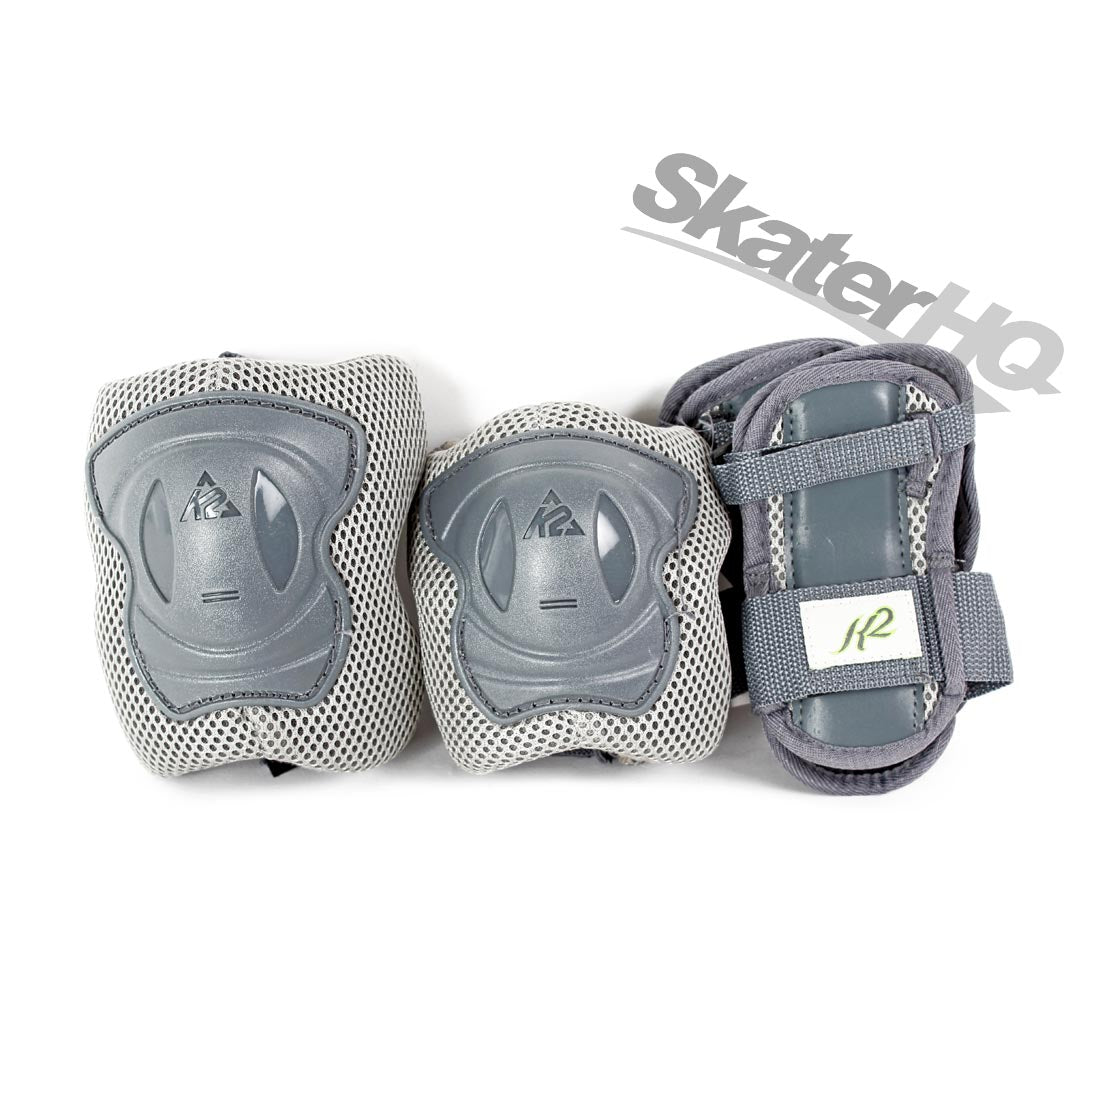 K2 Alexis Pad Set - Small Protective Gear